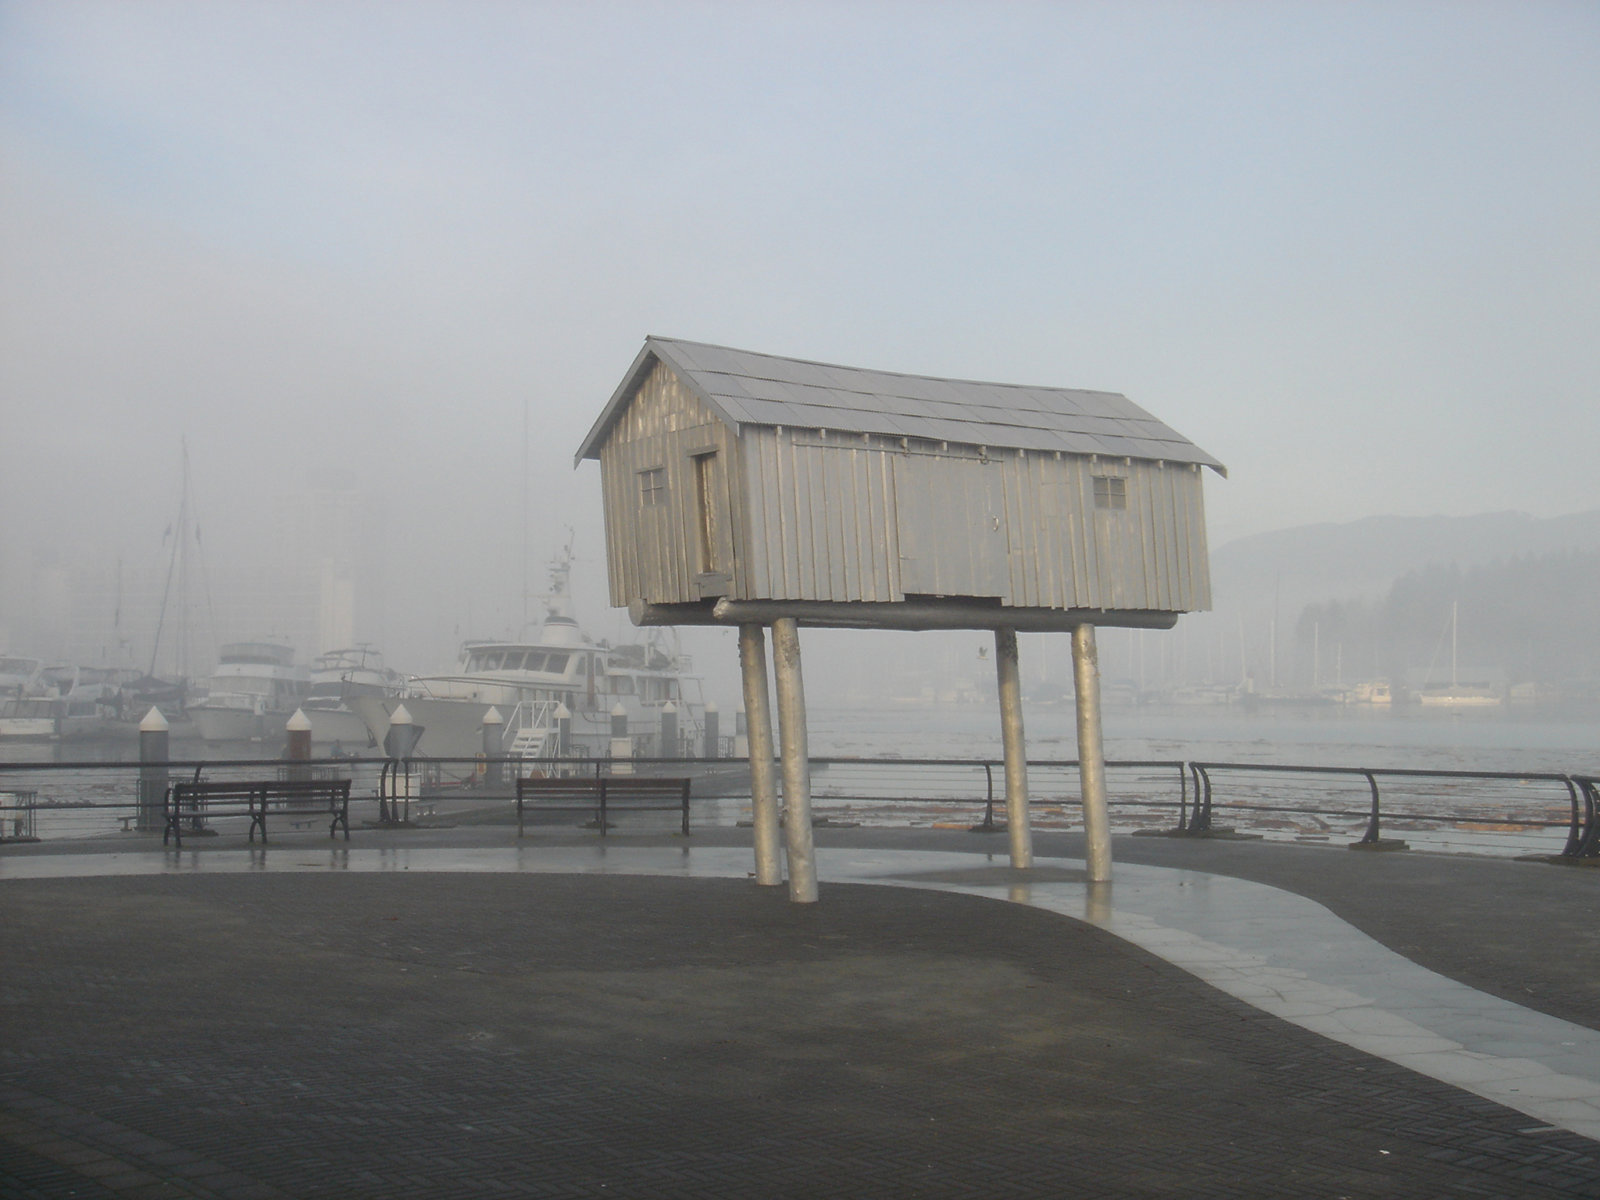 Liz Magor, LightShed, 2005, cast aluminum, dimensions variable. Installation view, Coal Harbour, Vancouver, BC